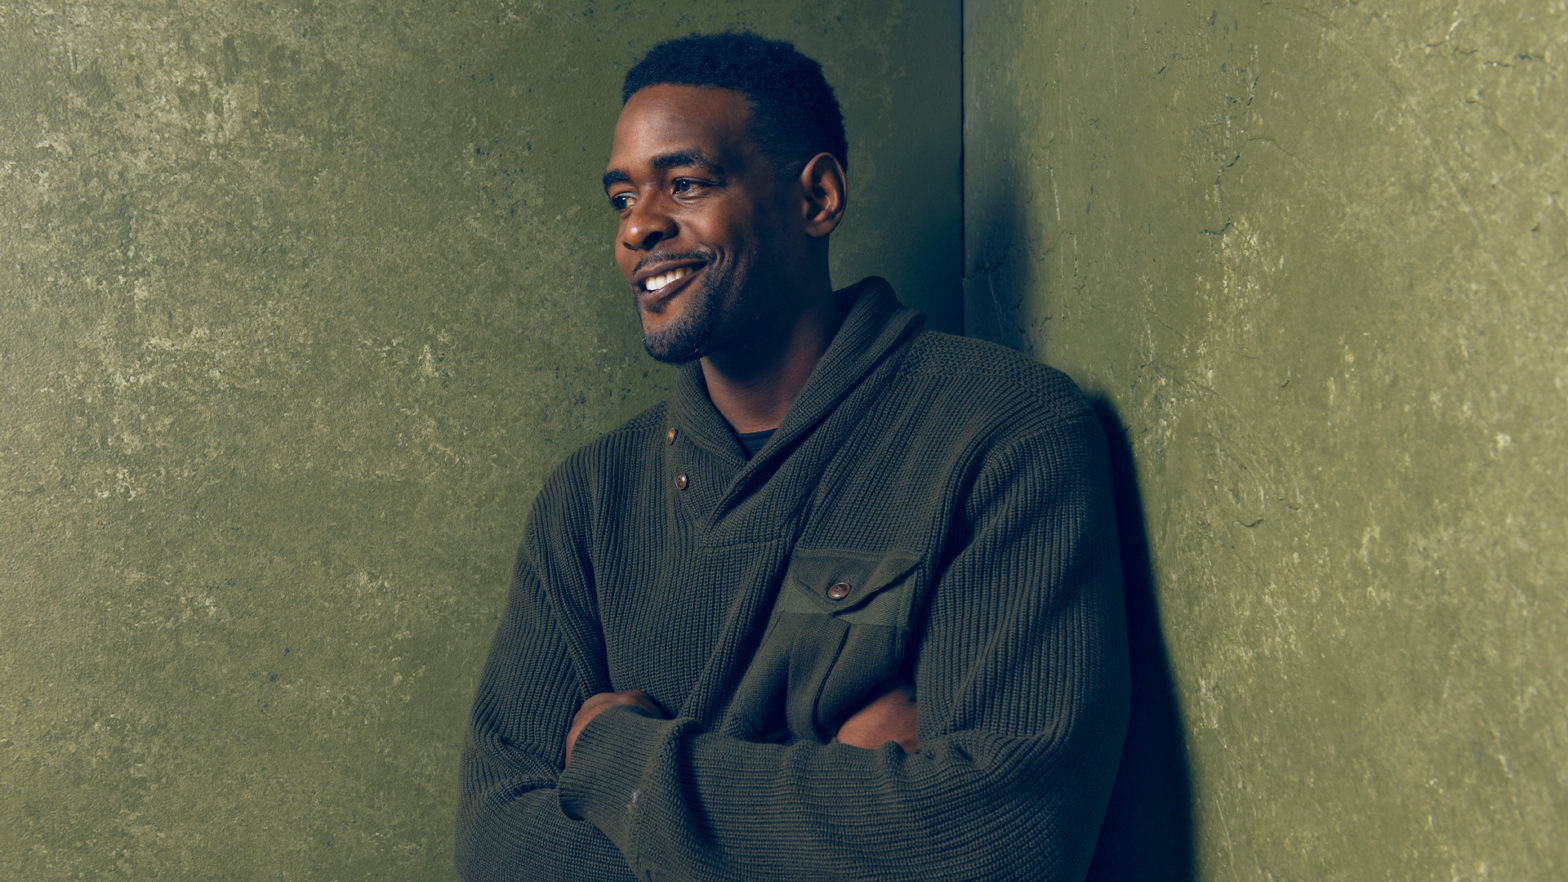 Former NBA Star Chris Webber Set To Build A $50M Cannabis Facility In His Hometown Of Detroit